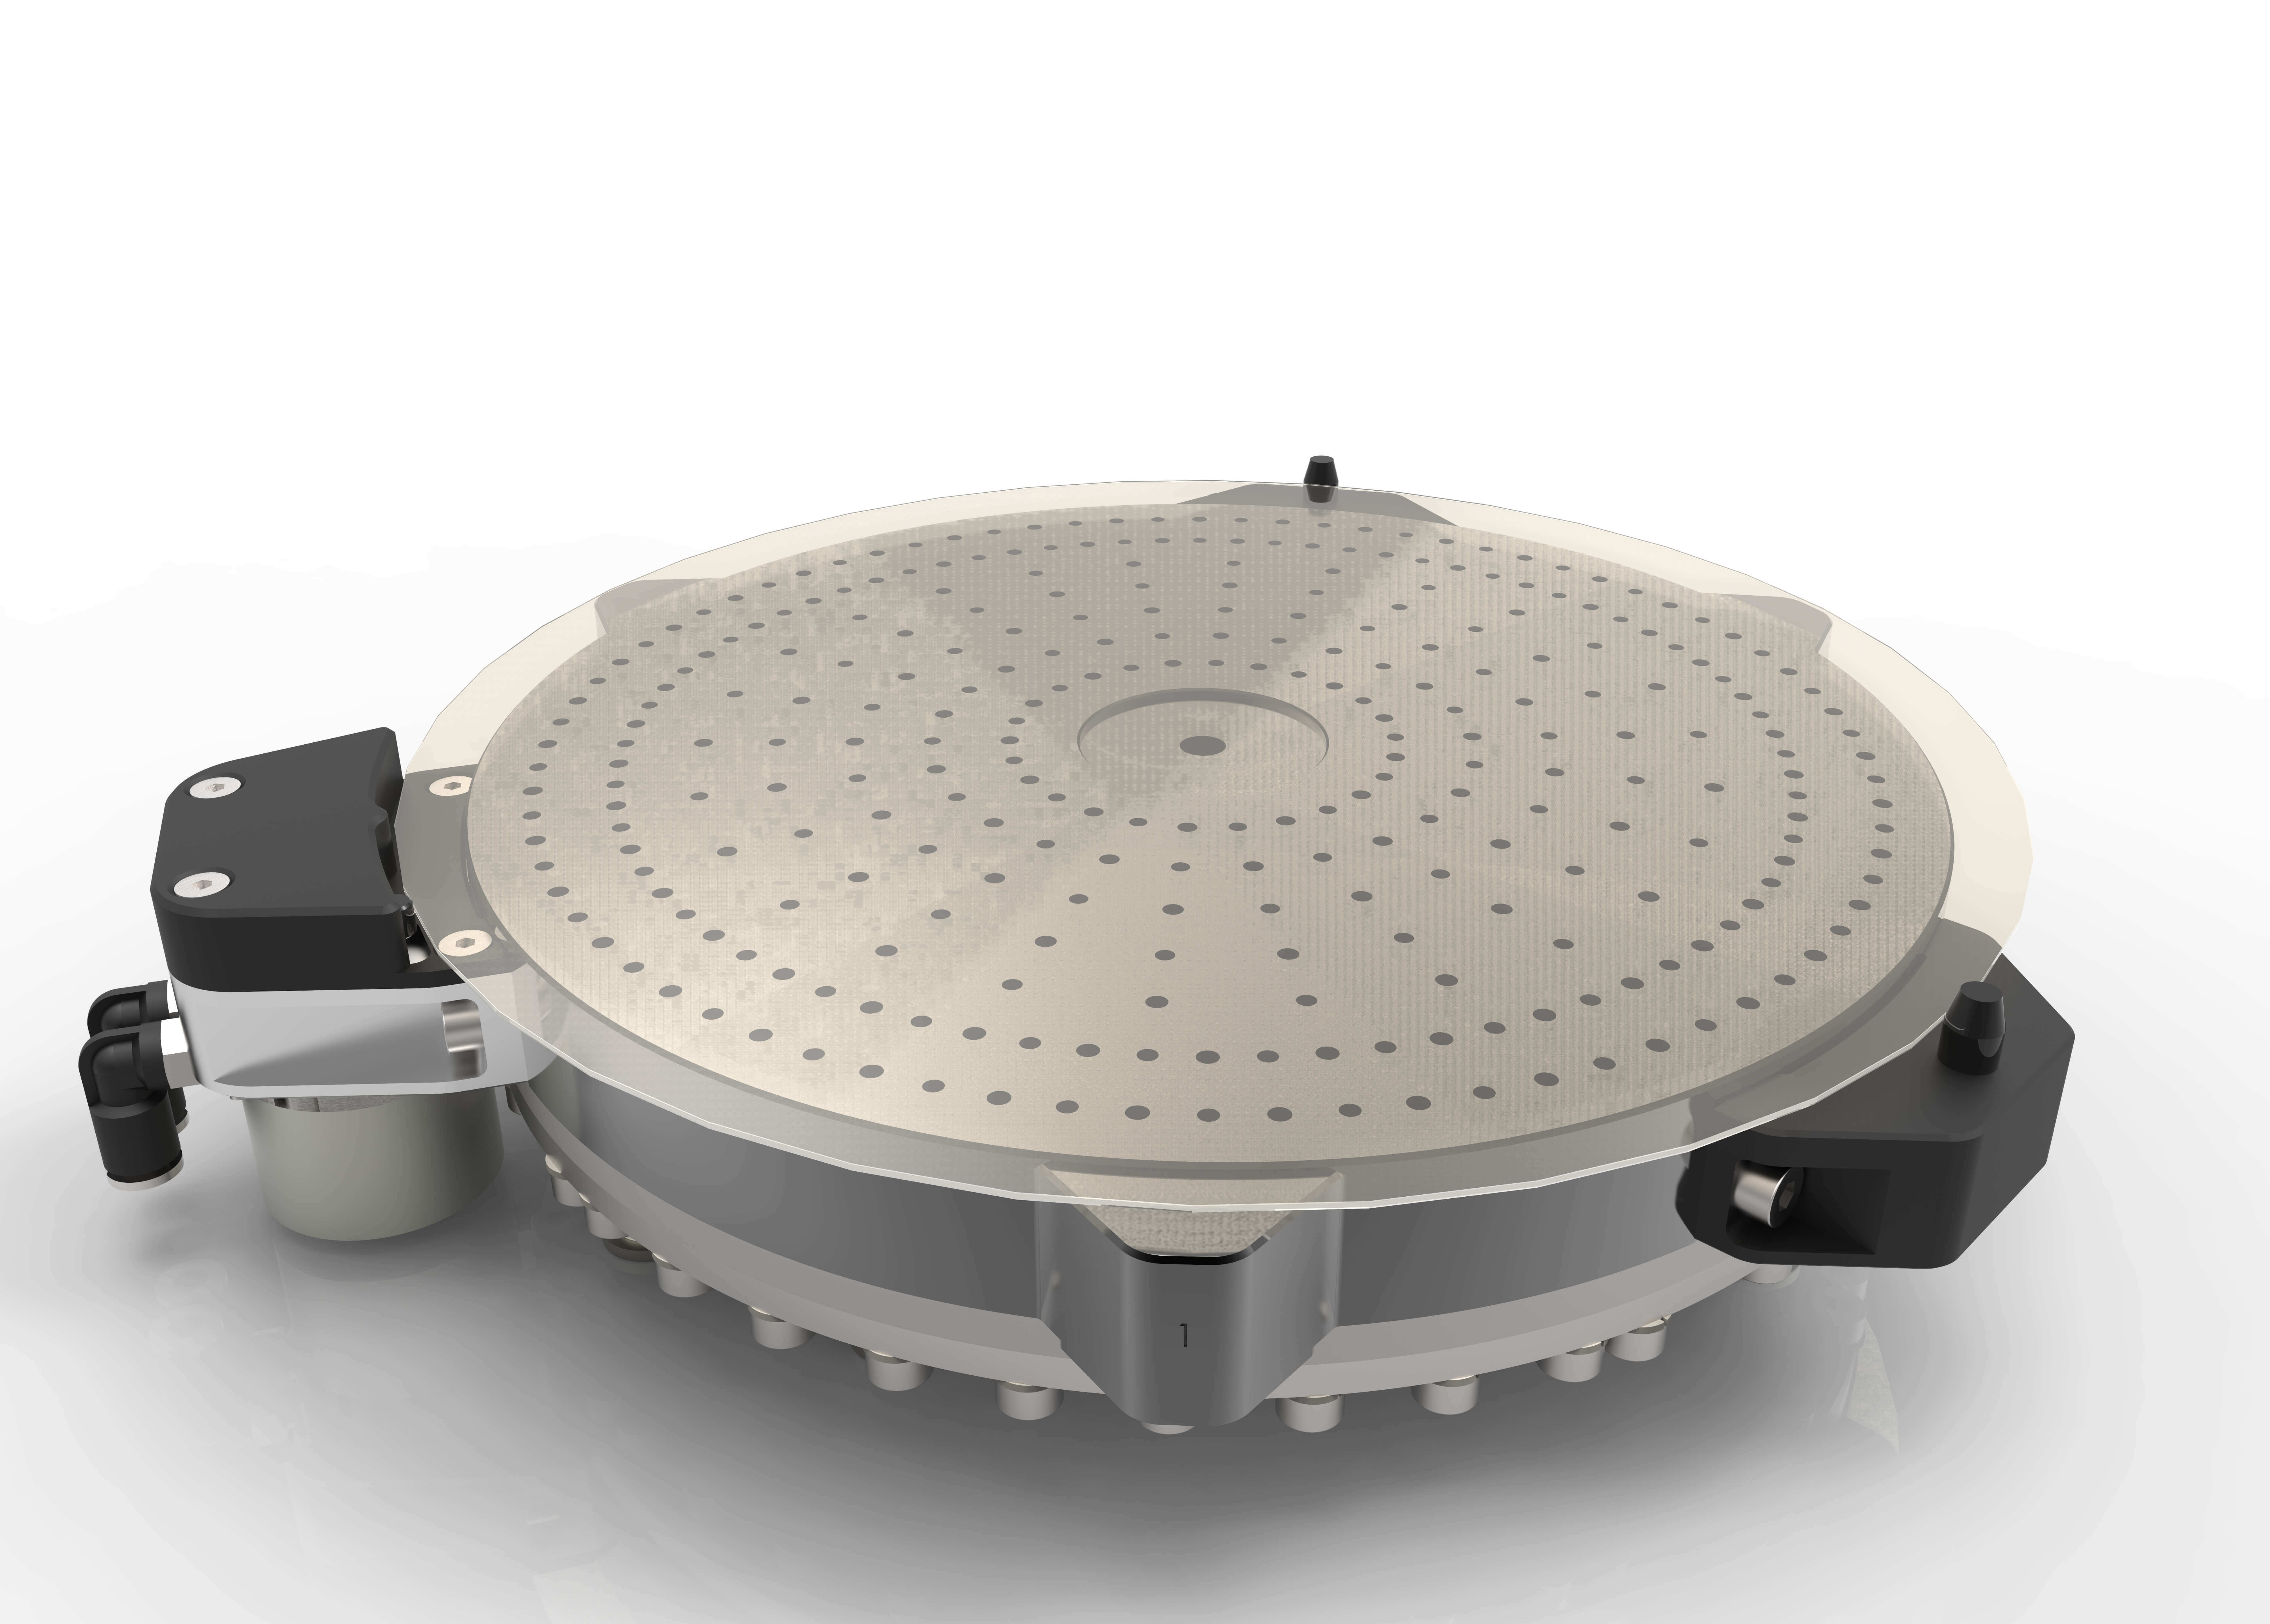 CoreFlow’s non-contact chuck reduces backside particle contamination in semiconductor wafers